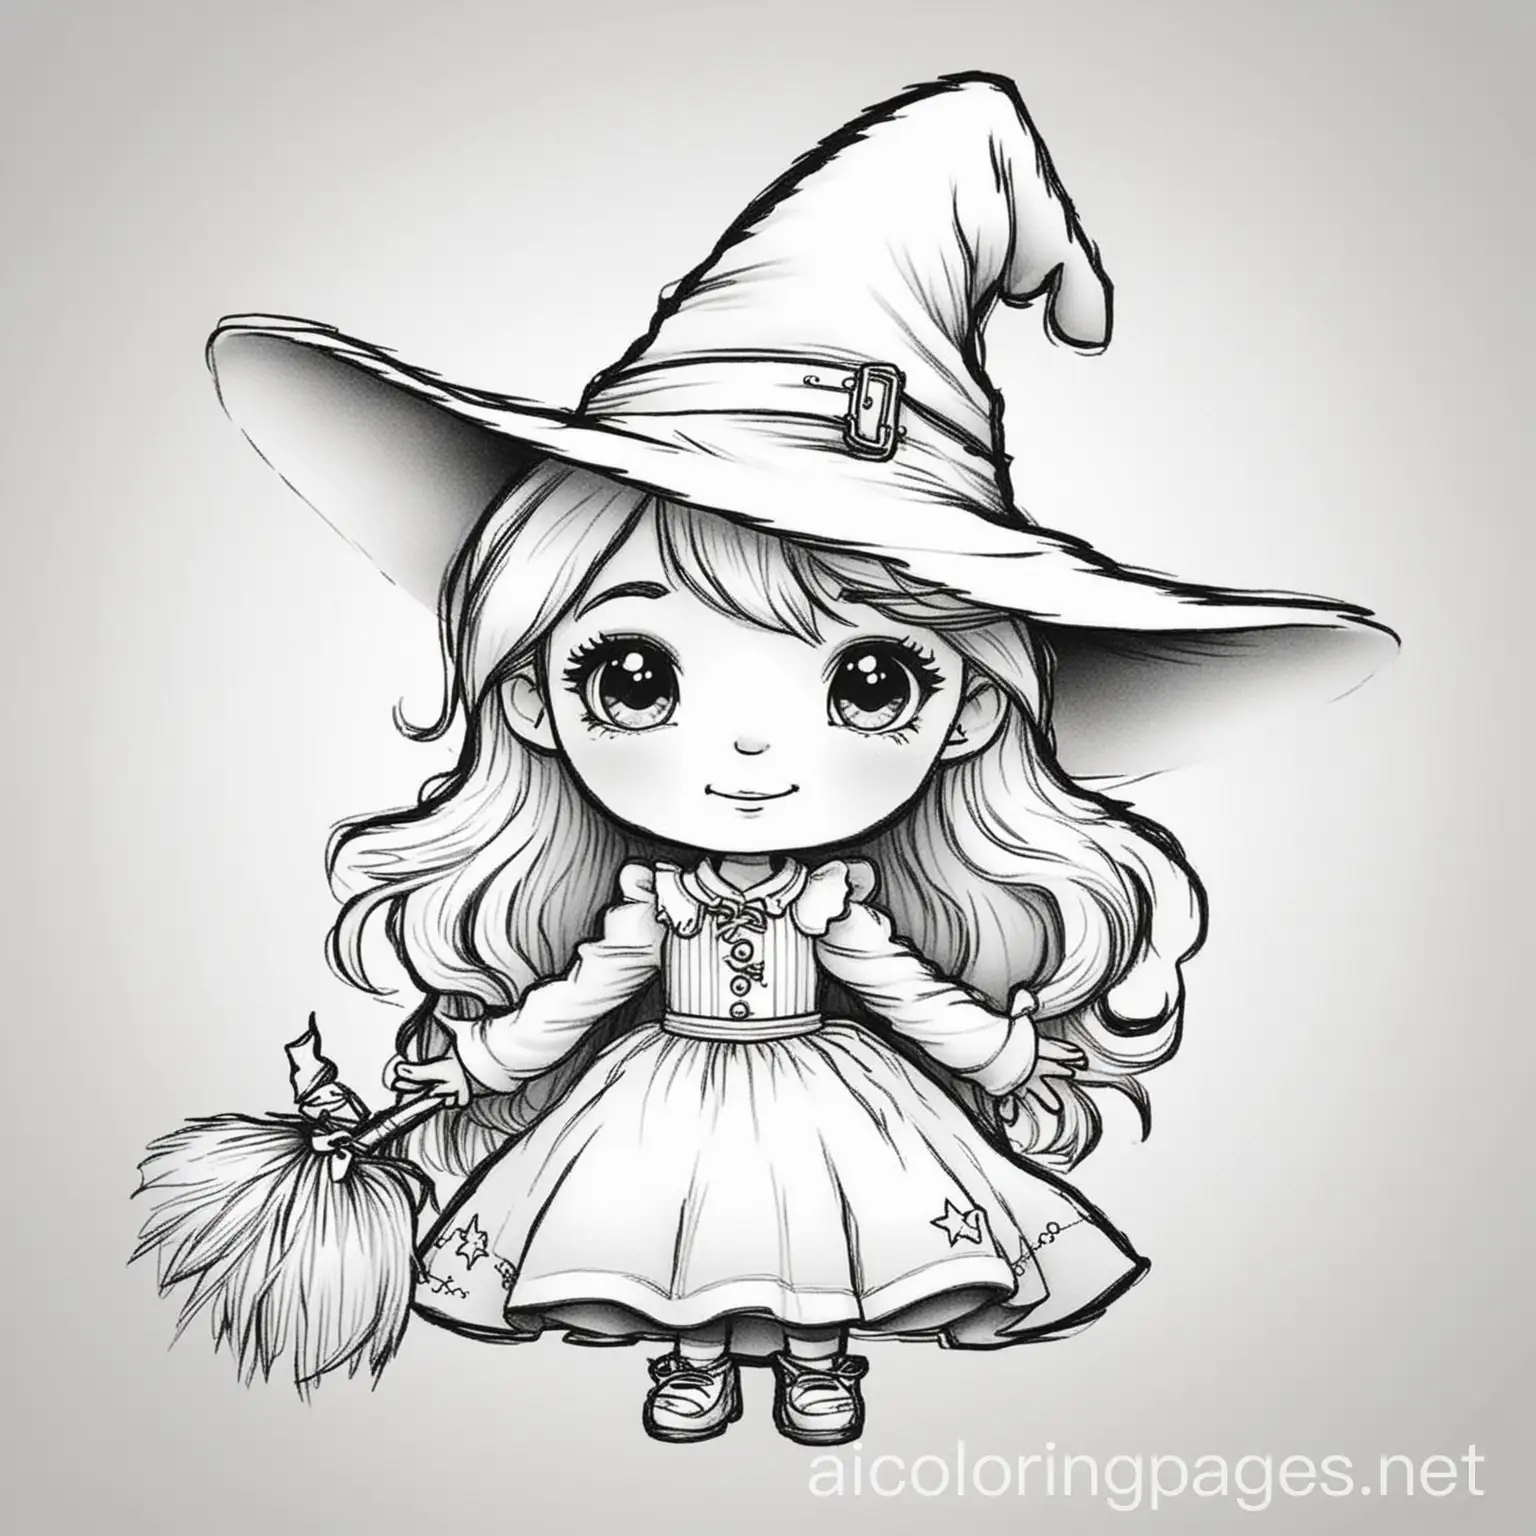 Cute-Little-Witch-Coloring-Page-Black-and-White-Line-Art-for-Kids